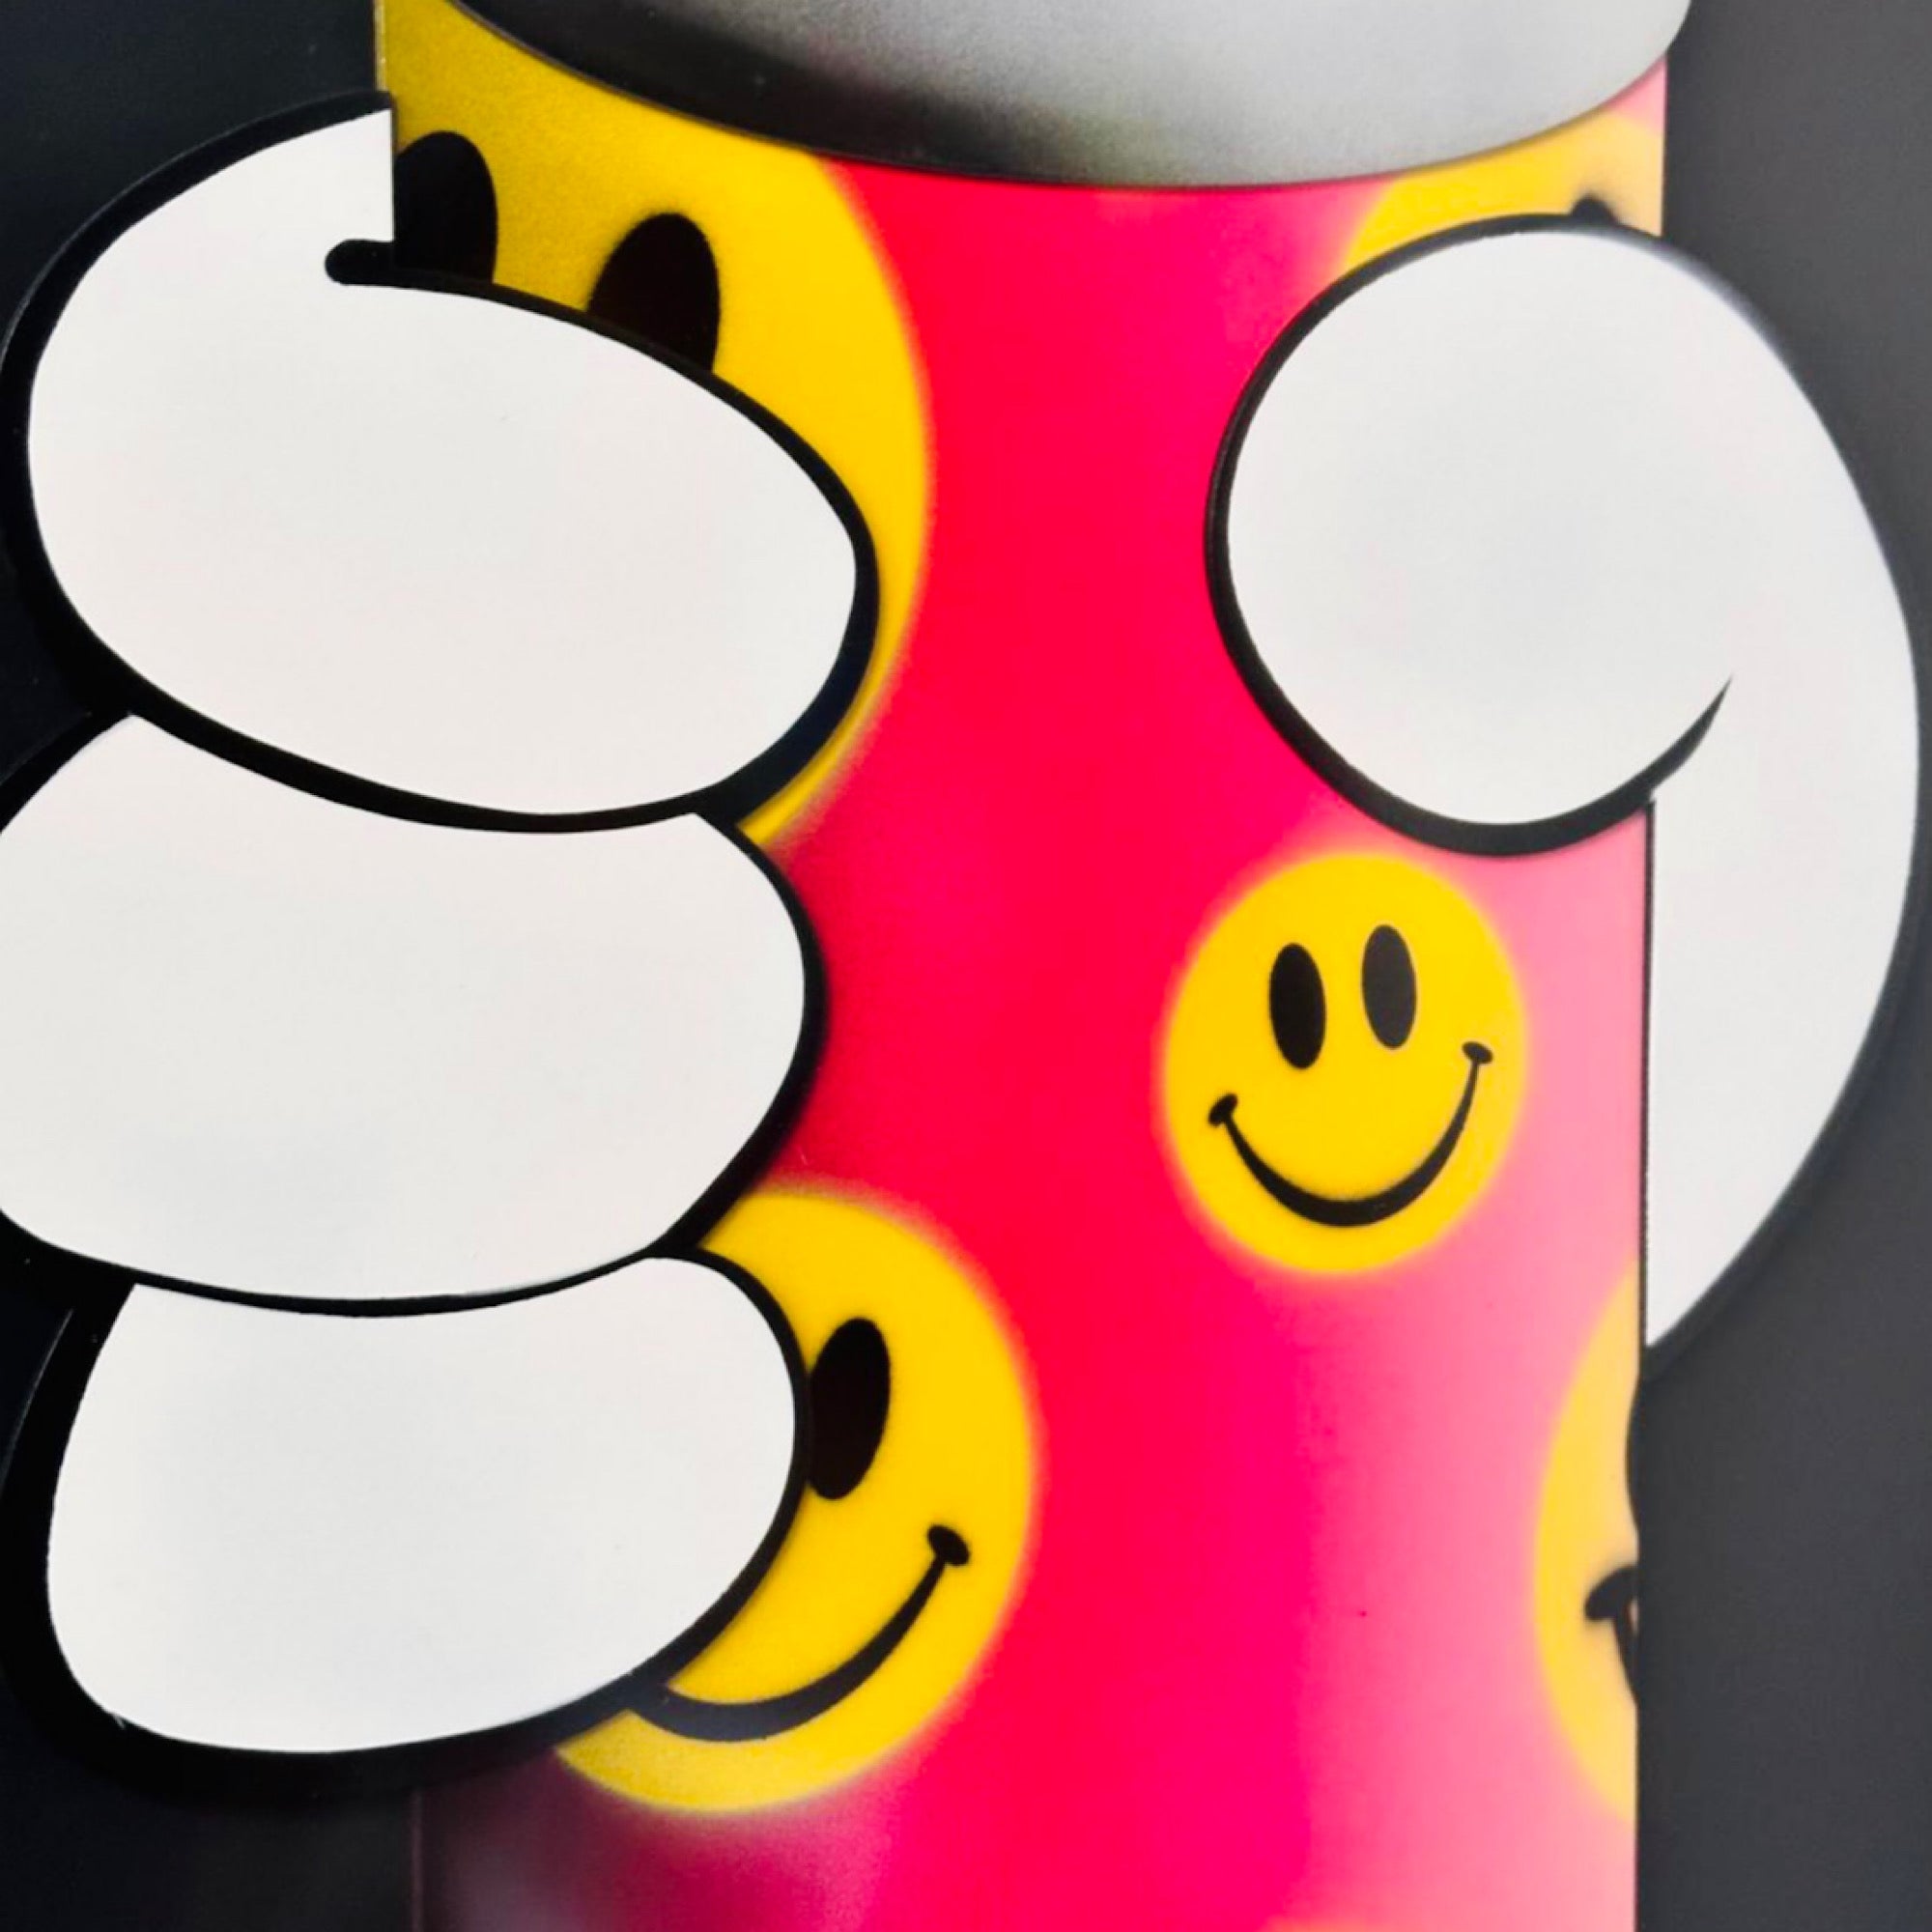 Pop Can - Pink Smiley edition